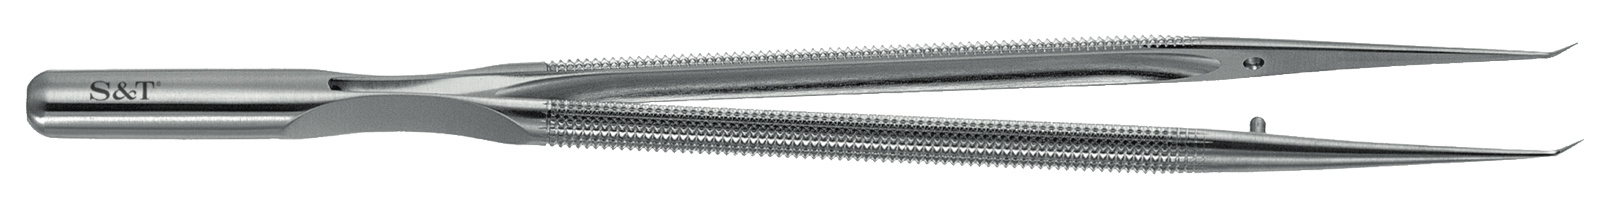 S&T Forceps By Sorensen 18cm FRAS-15 RM-8 Round Handle Balanced Line 0.2mm Angulated 45 degree Tip image 0